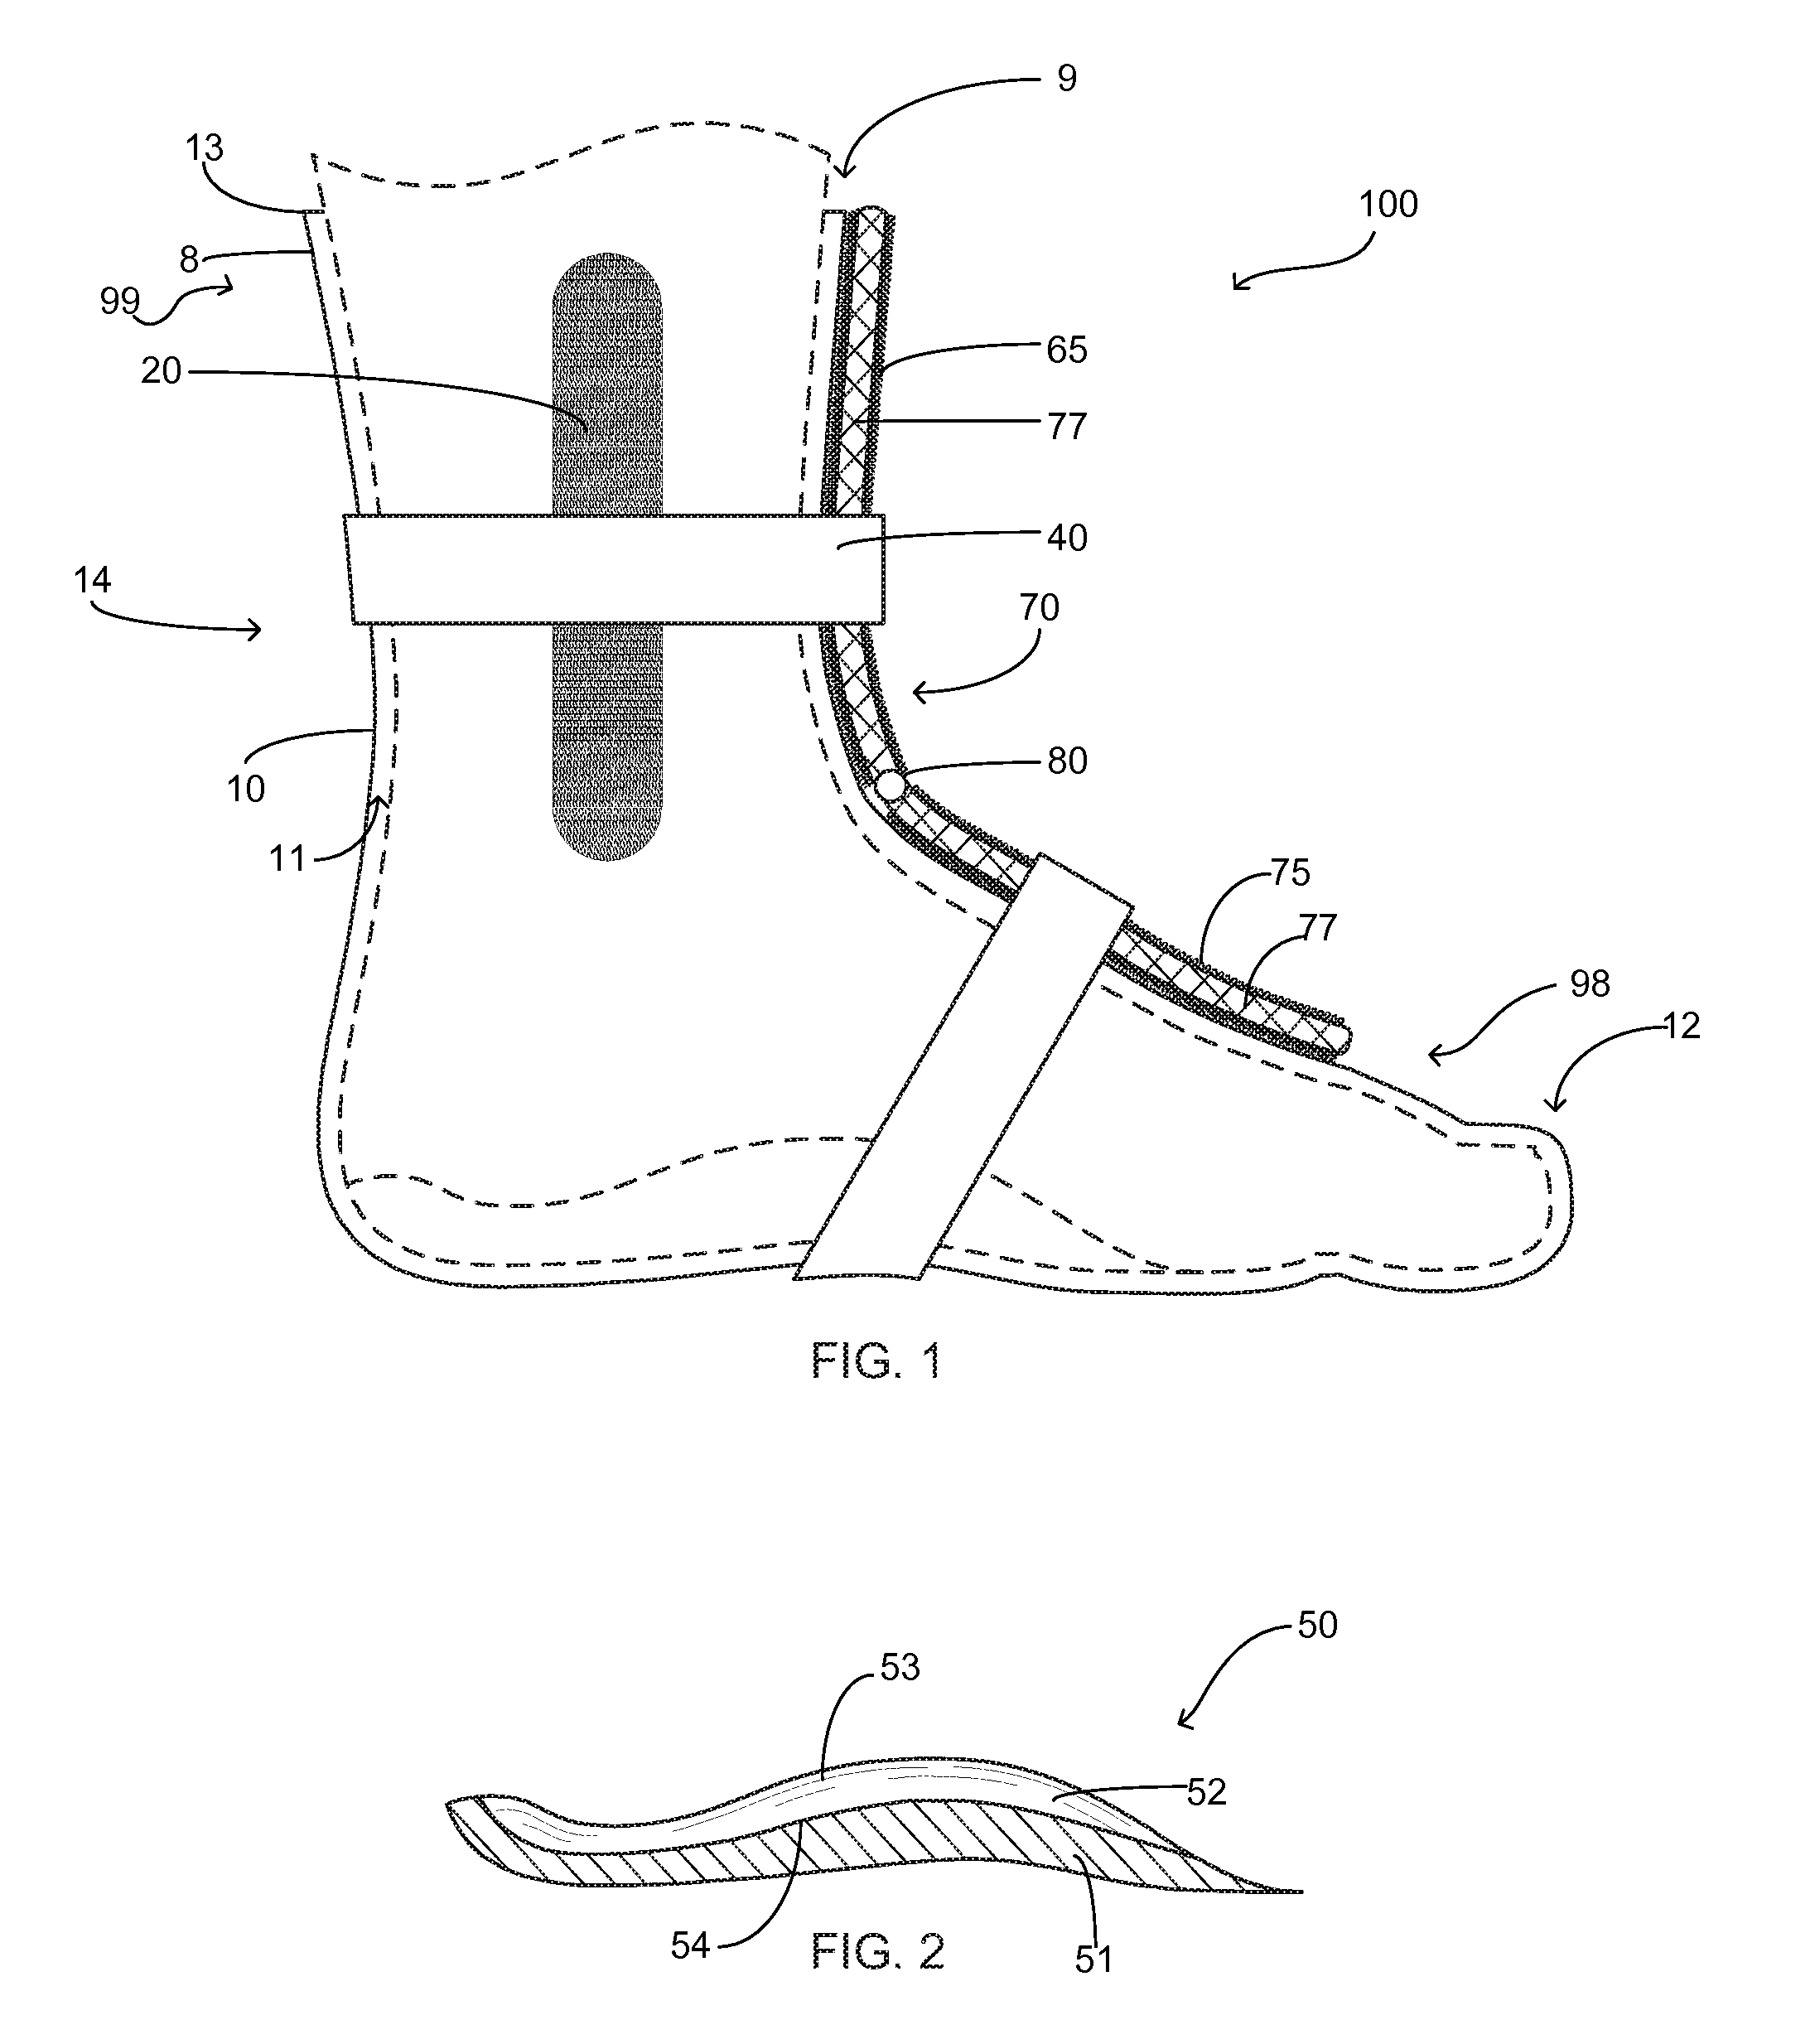 Foot pain treatment device and method of use